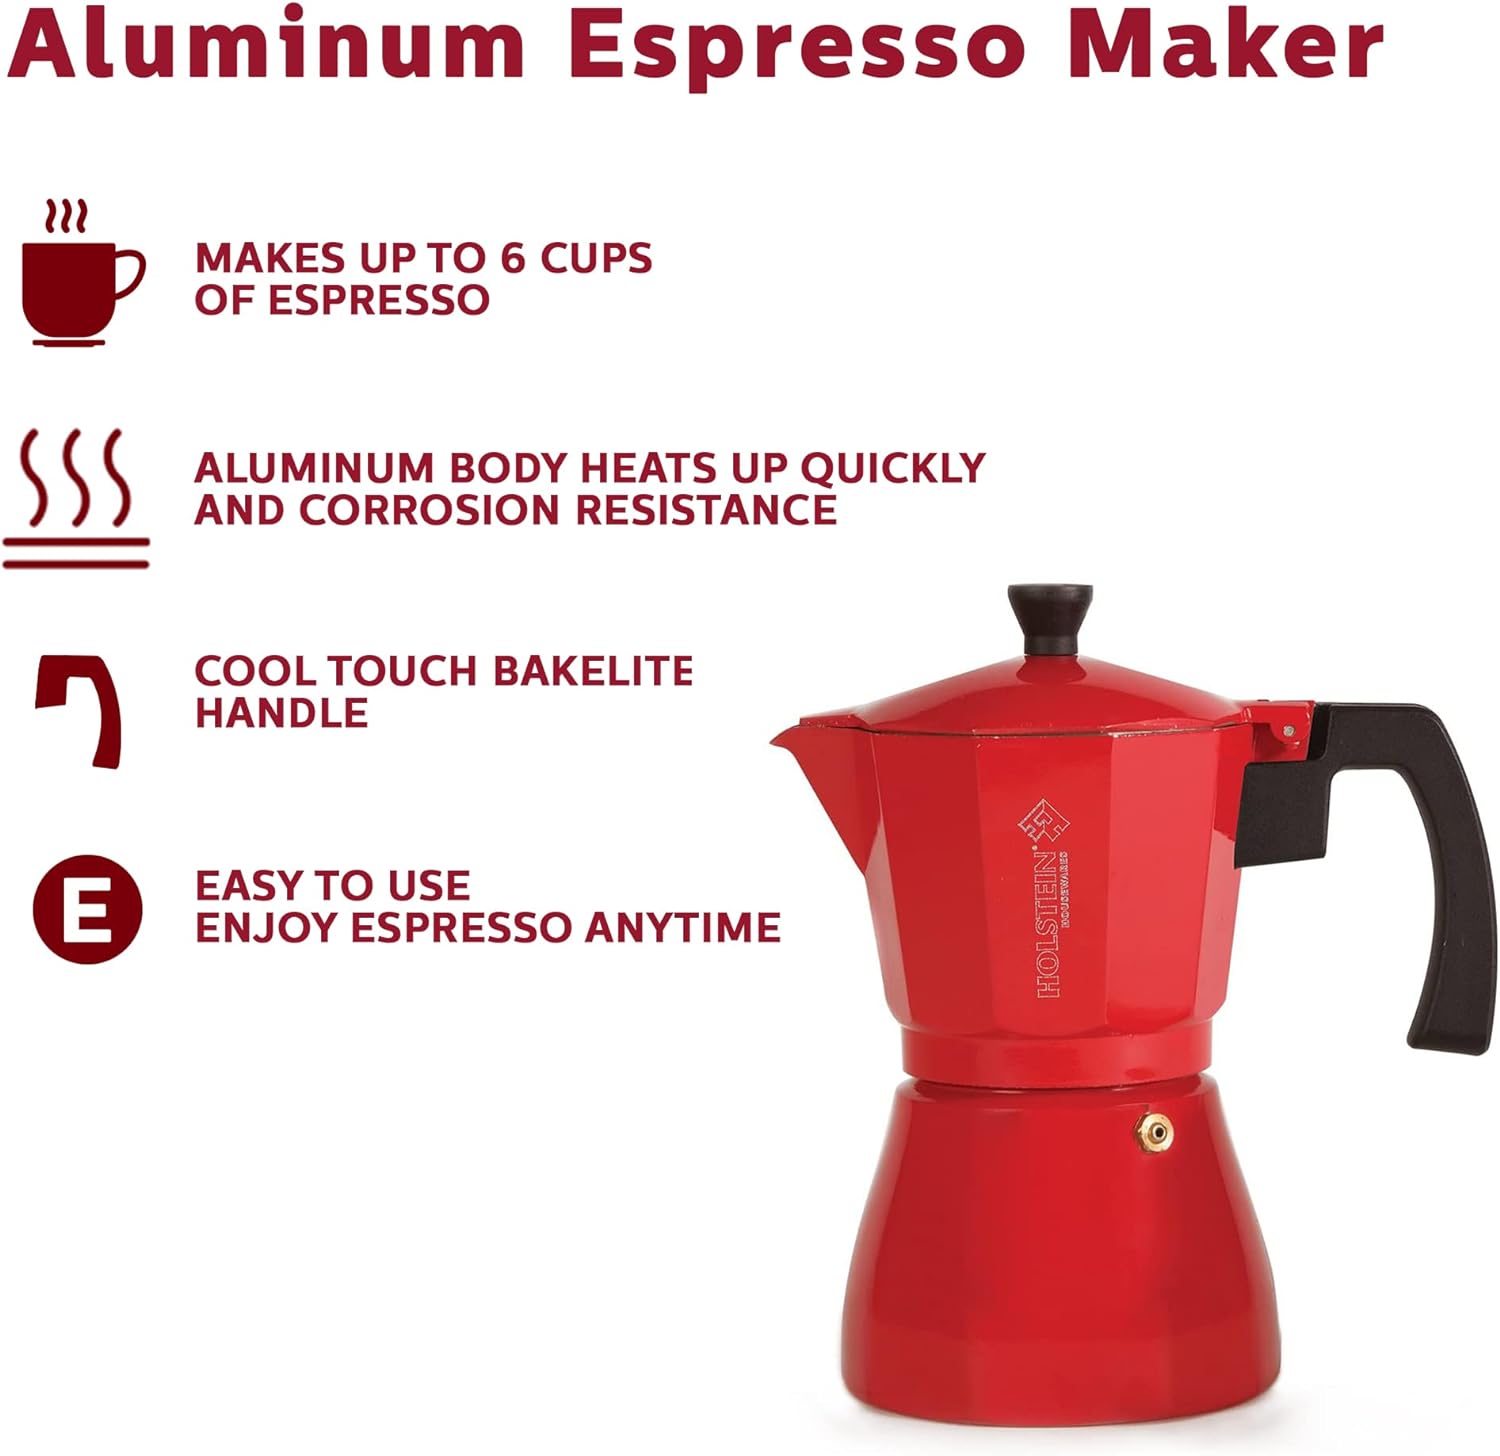 Holstein Housewares - 6 Cup Aluminum Stovetop Espresso Maker and Moka Pot - Great Tasting Traditional Espresso Coffee, Italian and Cuban Café Brewing in Minutes, Mint